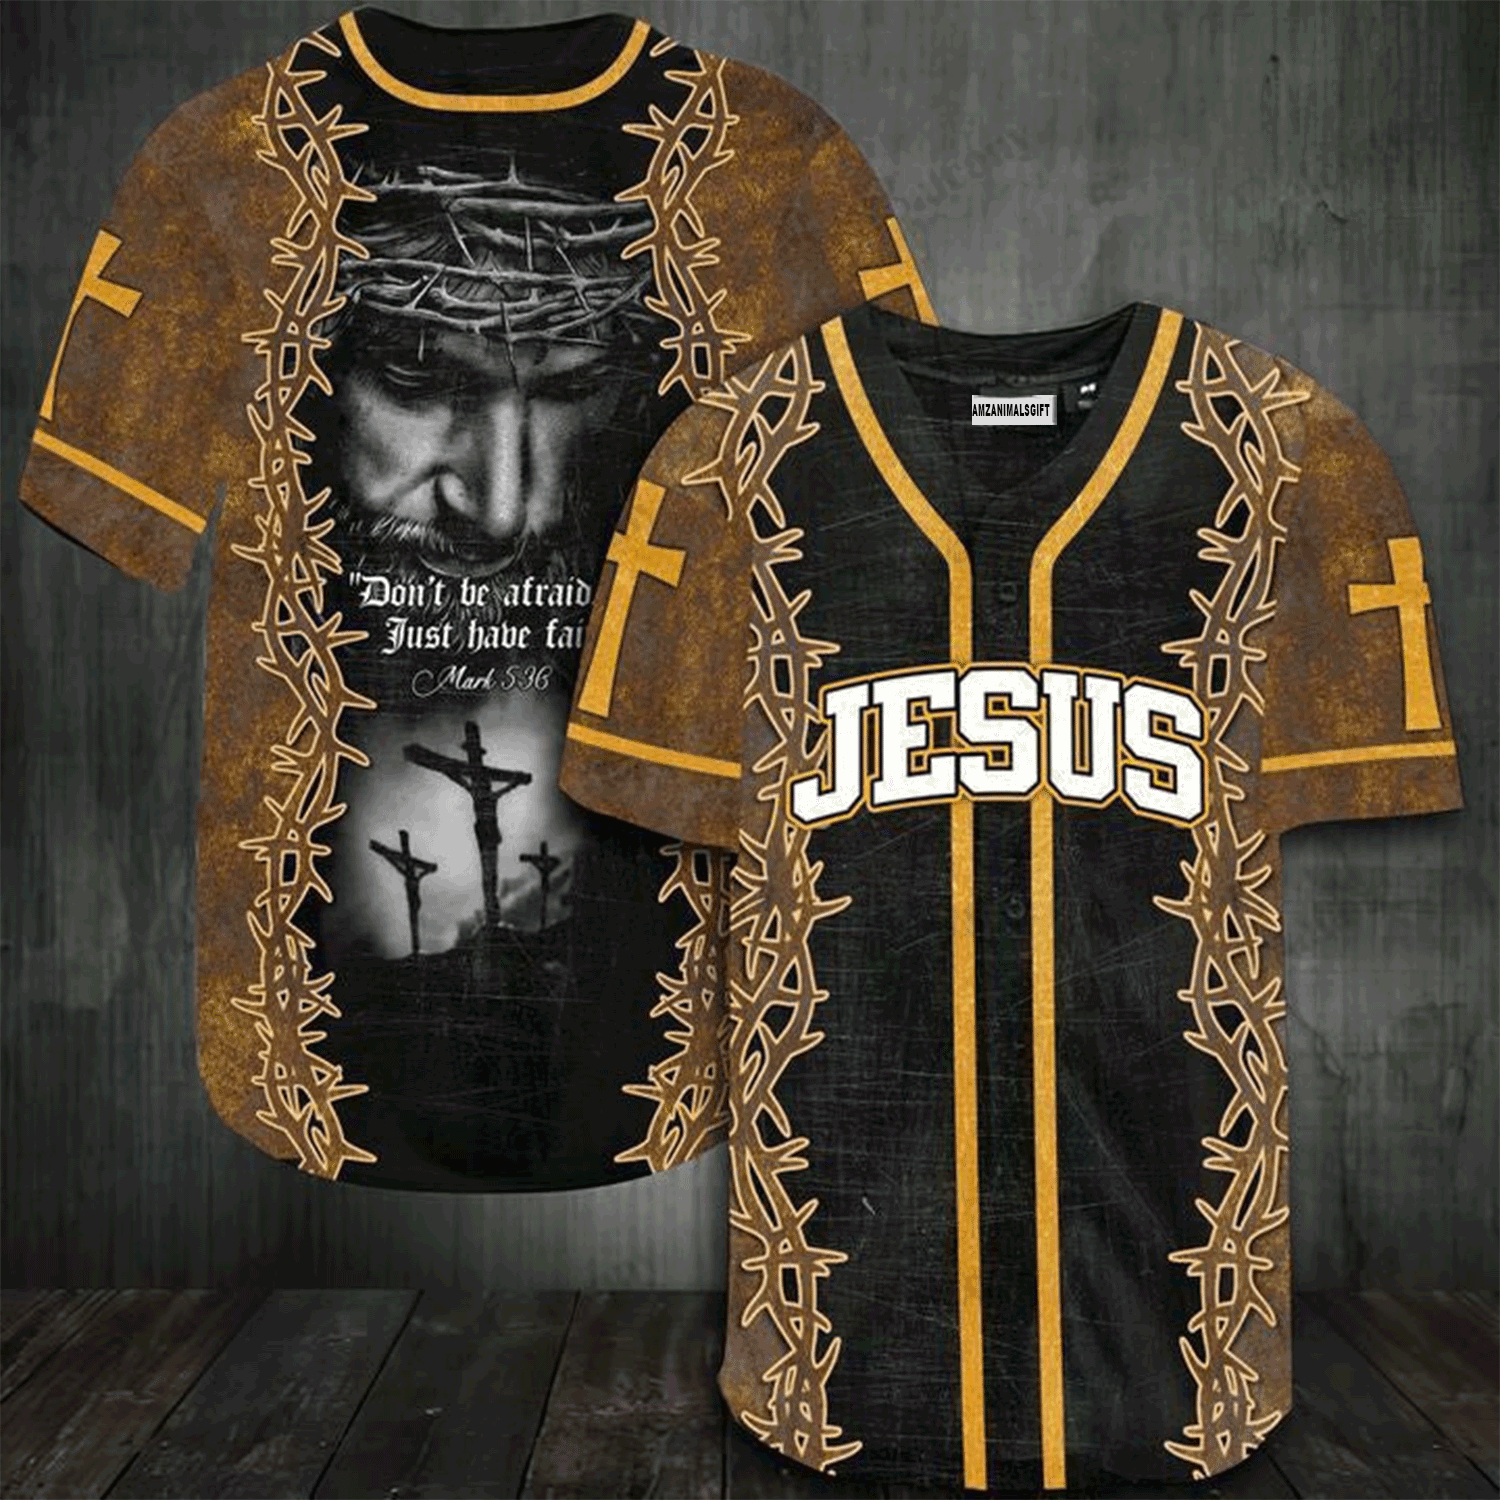 Jesus Baseball Jersey Shirt - Don't be afraid, just have faith Baseball Jersey Shirt For Men & Women, Perfect Gift For Christian